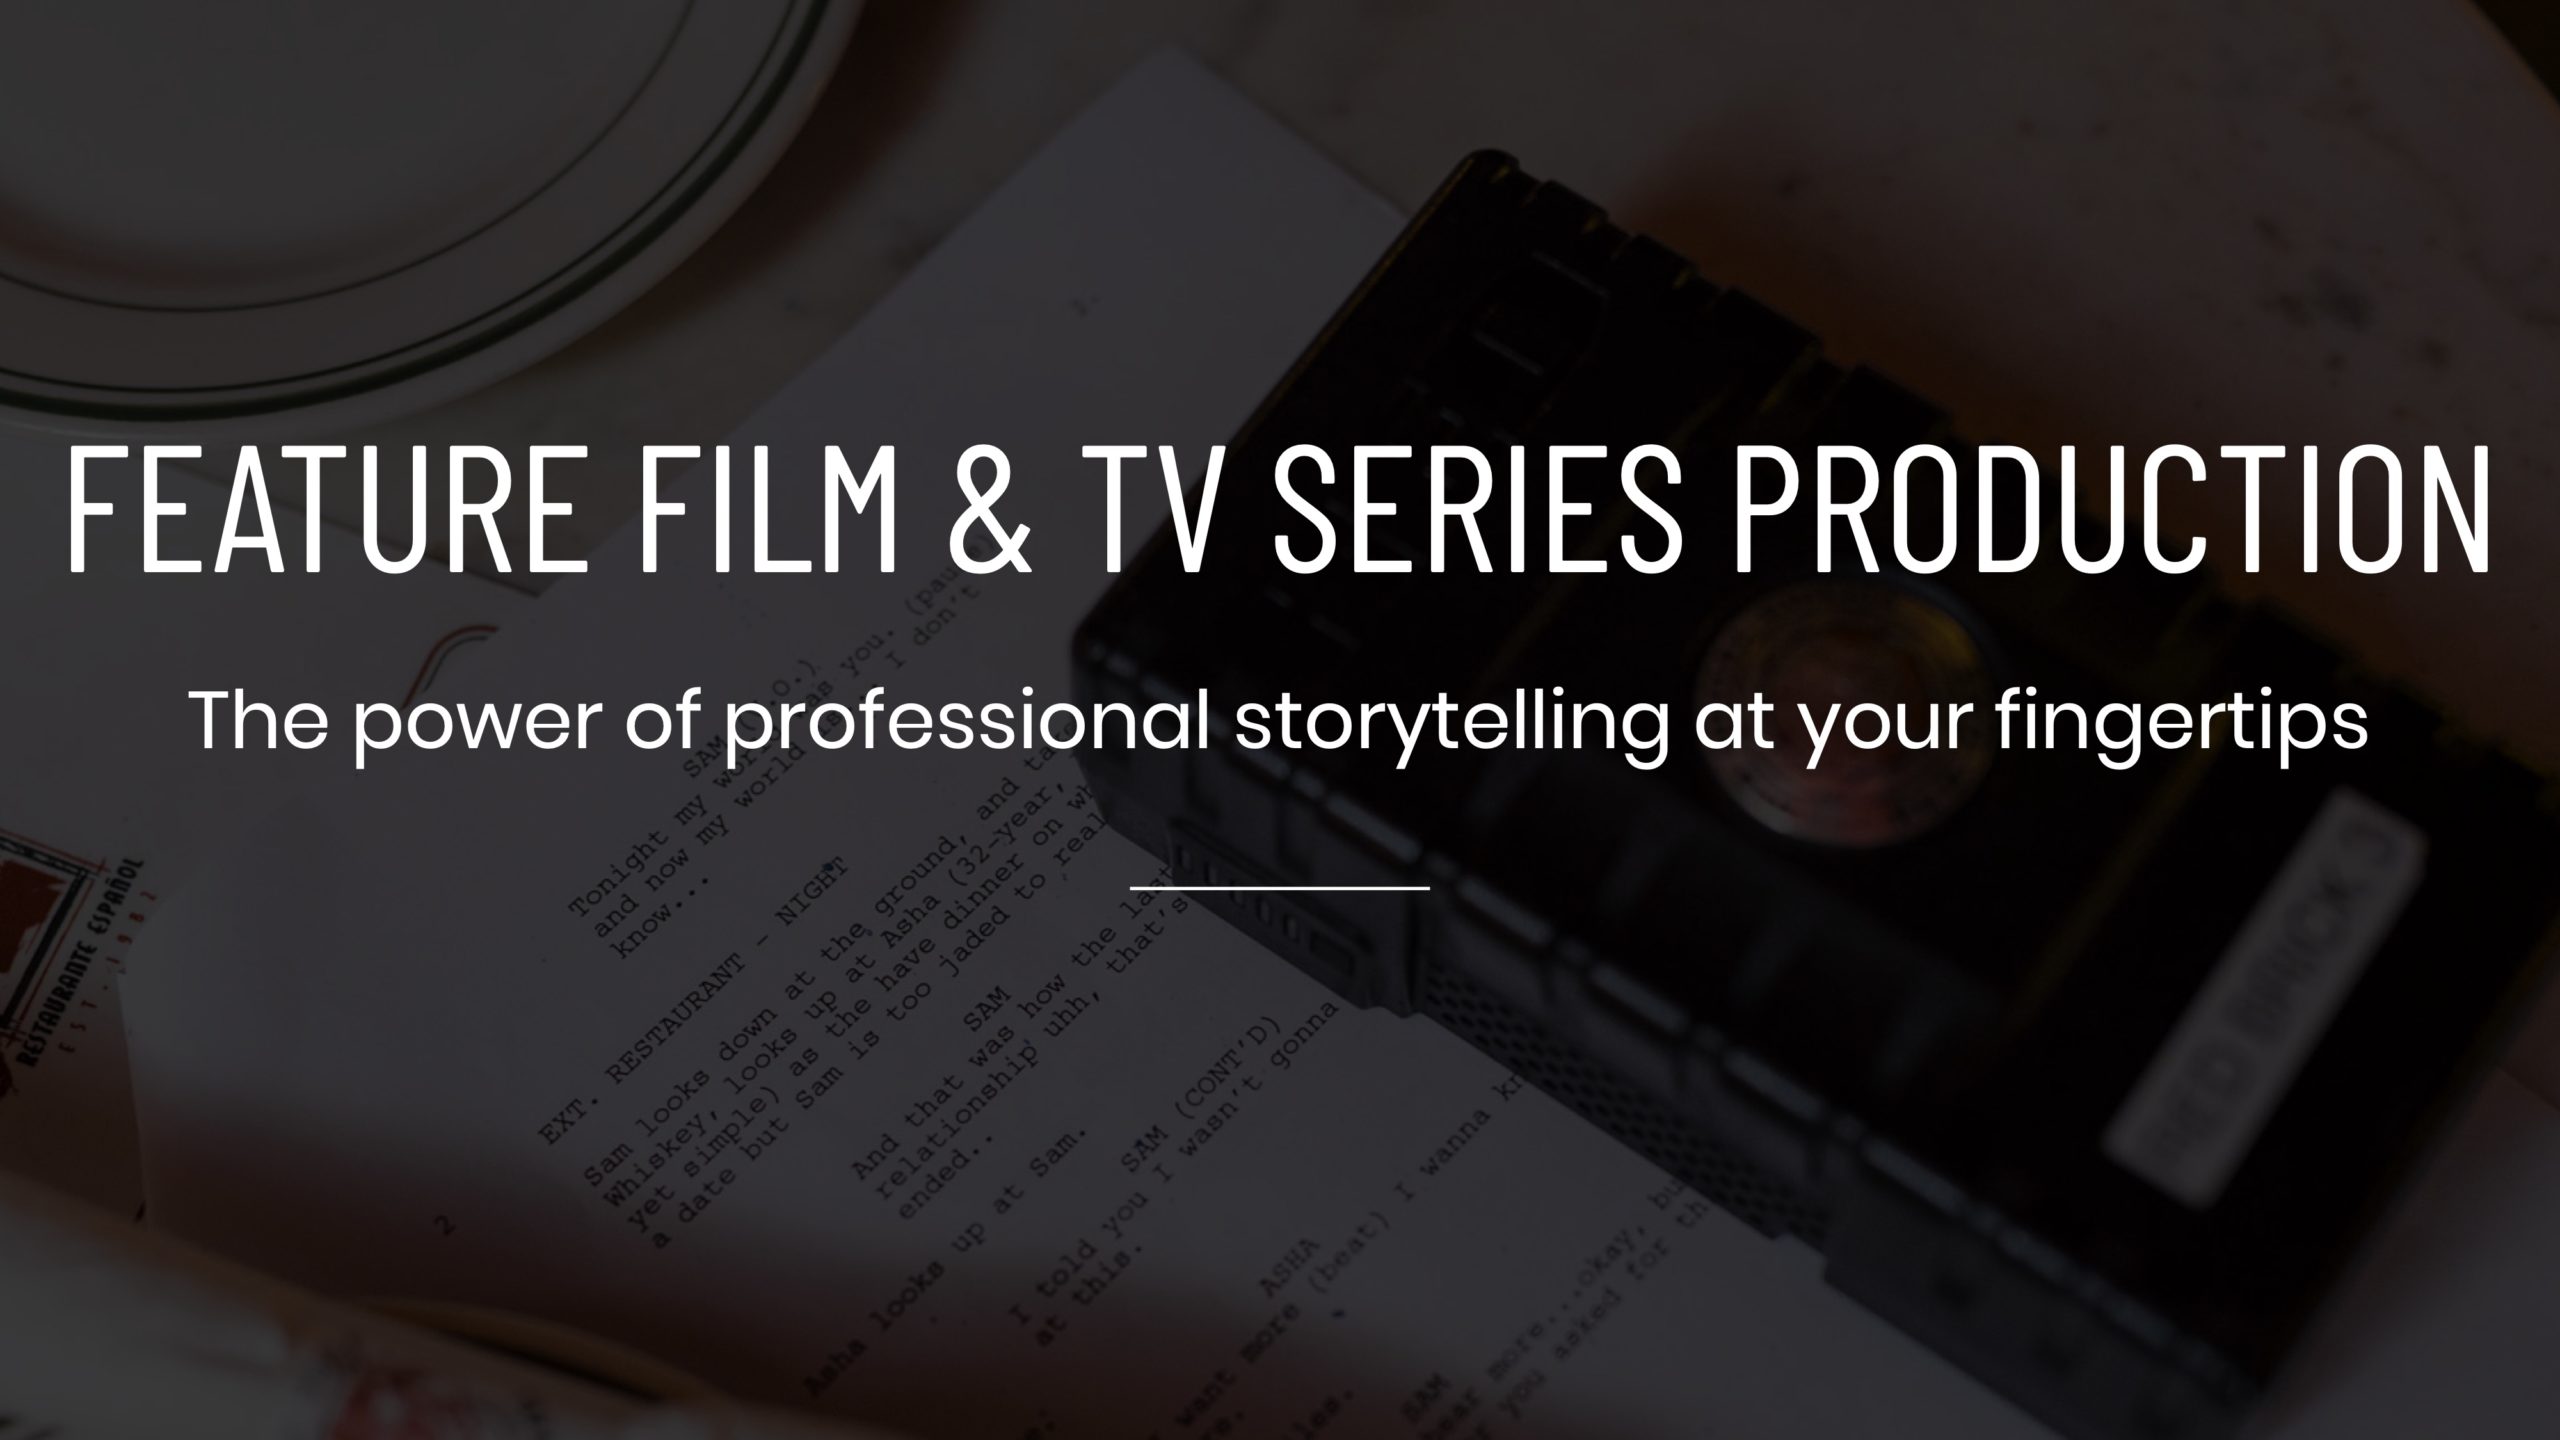 White Feature Film TV Production The power of professional storytelling at your fingertips title Services by C&I Studios Tile on dimmed background of equipment resting on a film script